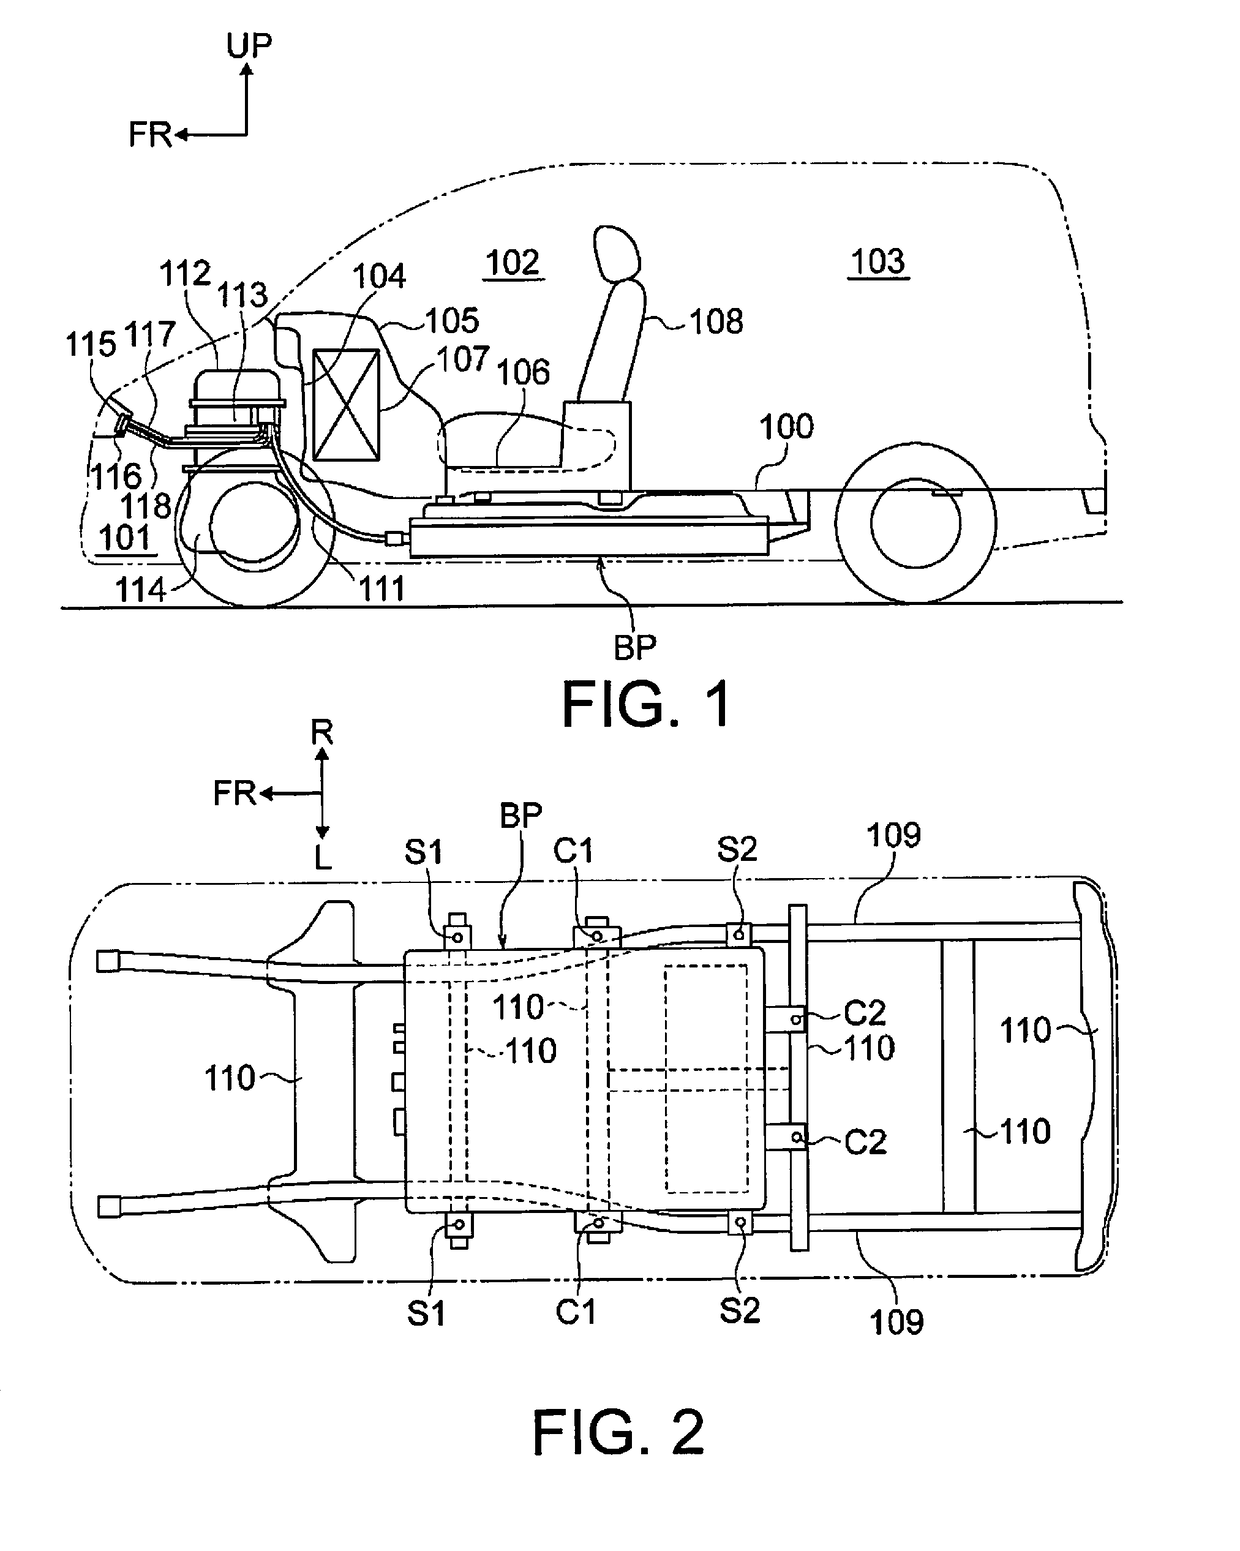 Battery pack temperature control structure for electric vehicles